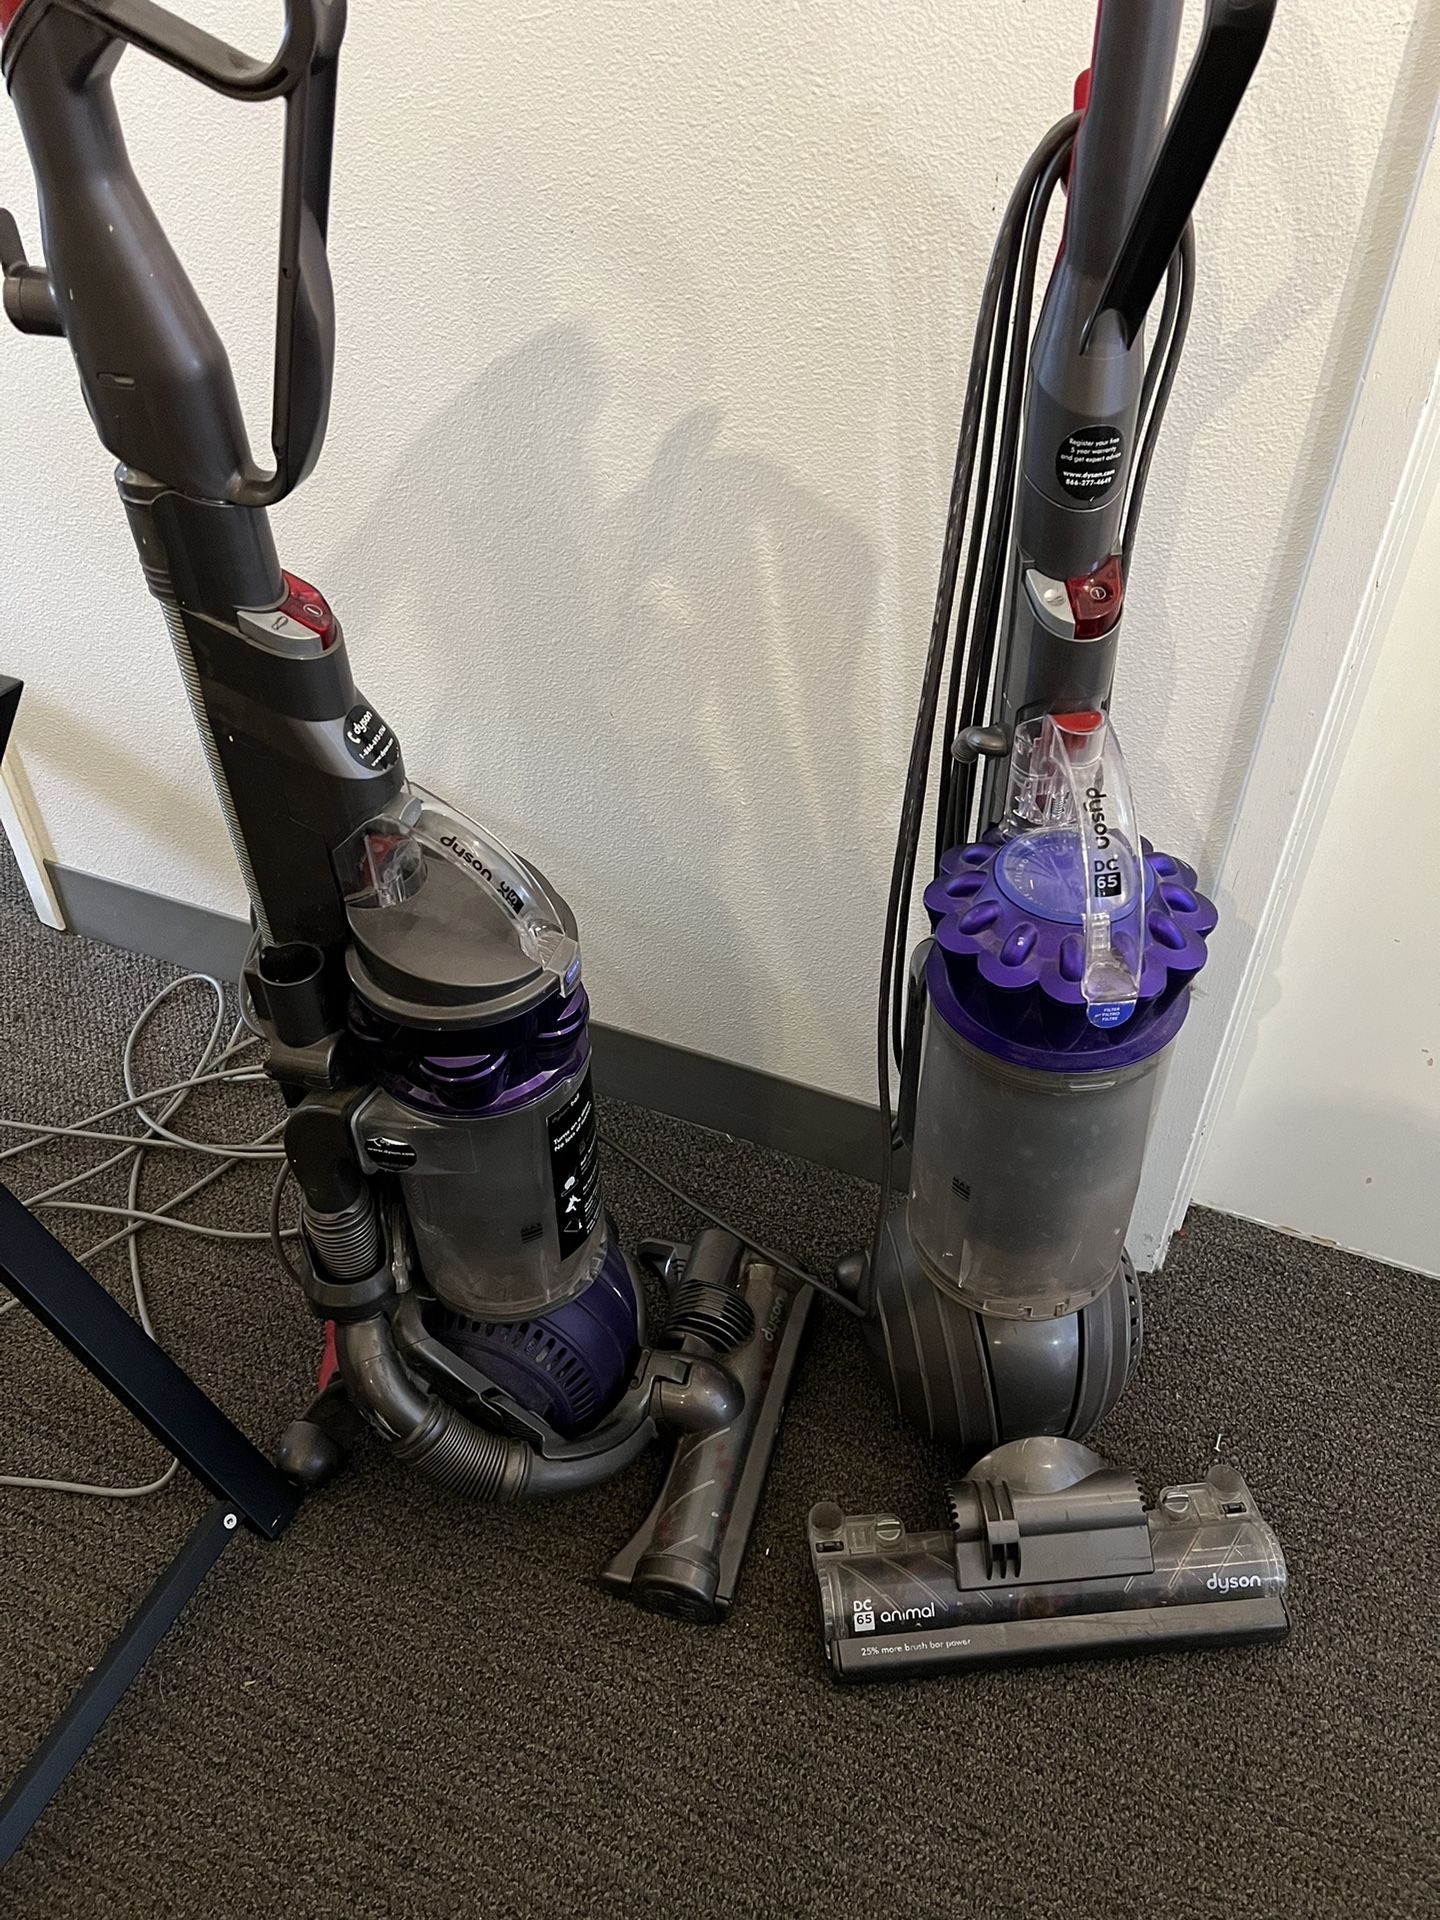 Two Dyson Vacuums